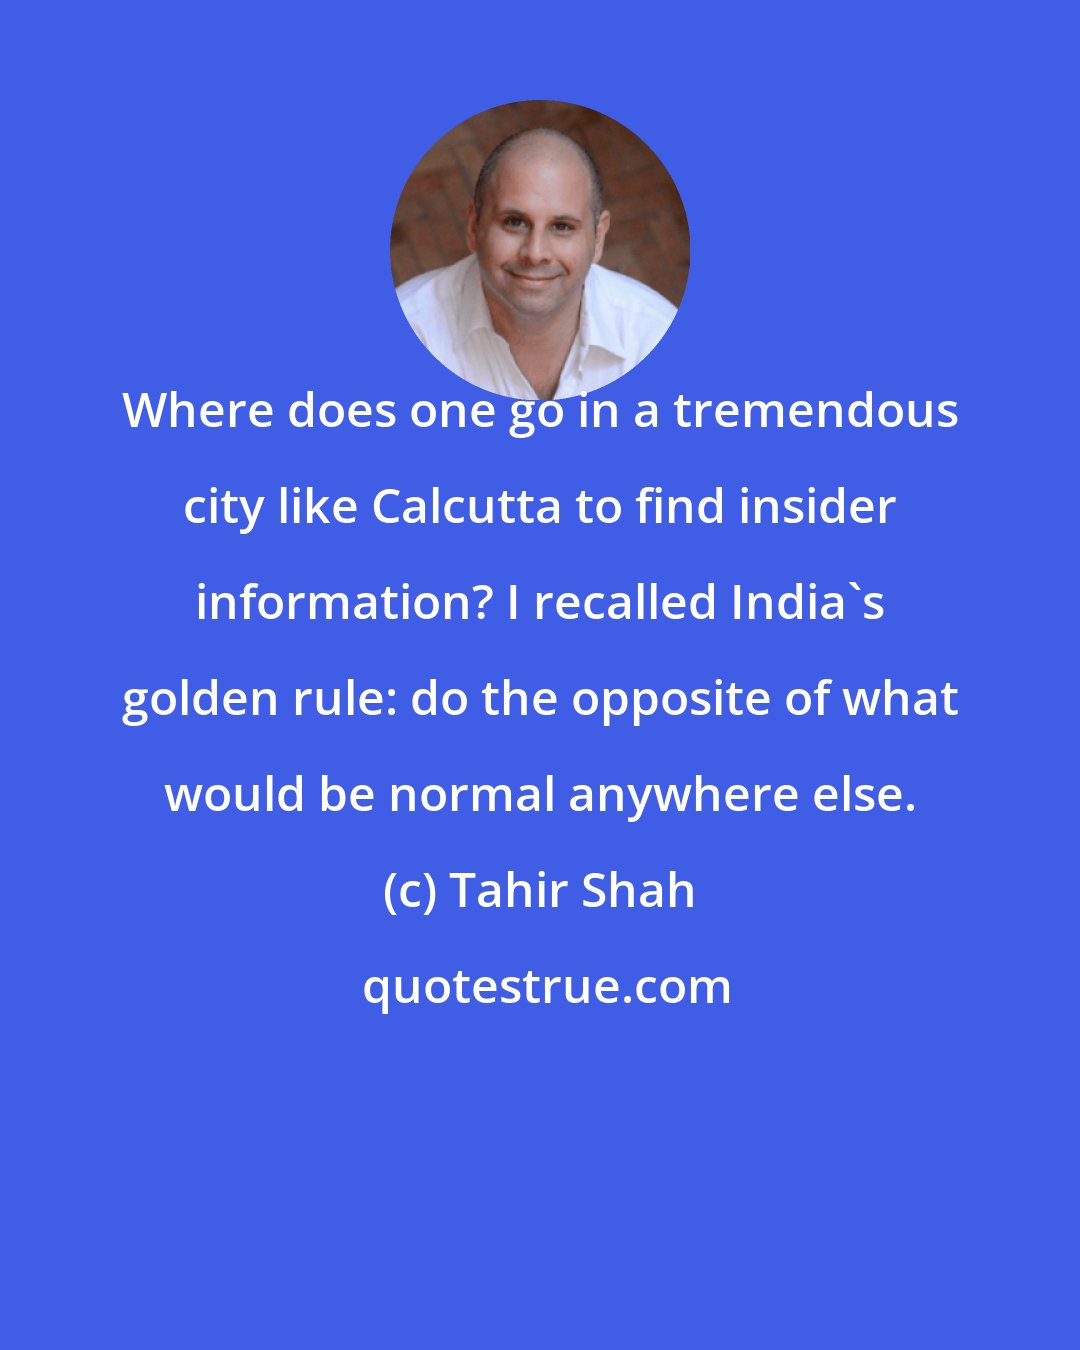 Tahir Shah: Where does one go in a tremendous city like Calcutta to find insider information? I recalled India's golden rule: do the opposite of what would be normal anywhere else.